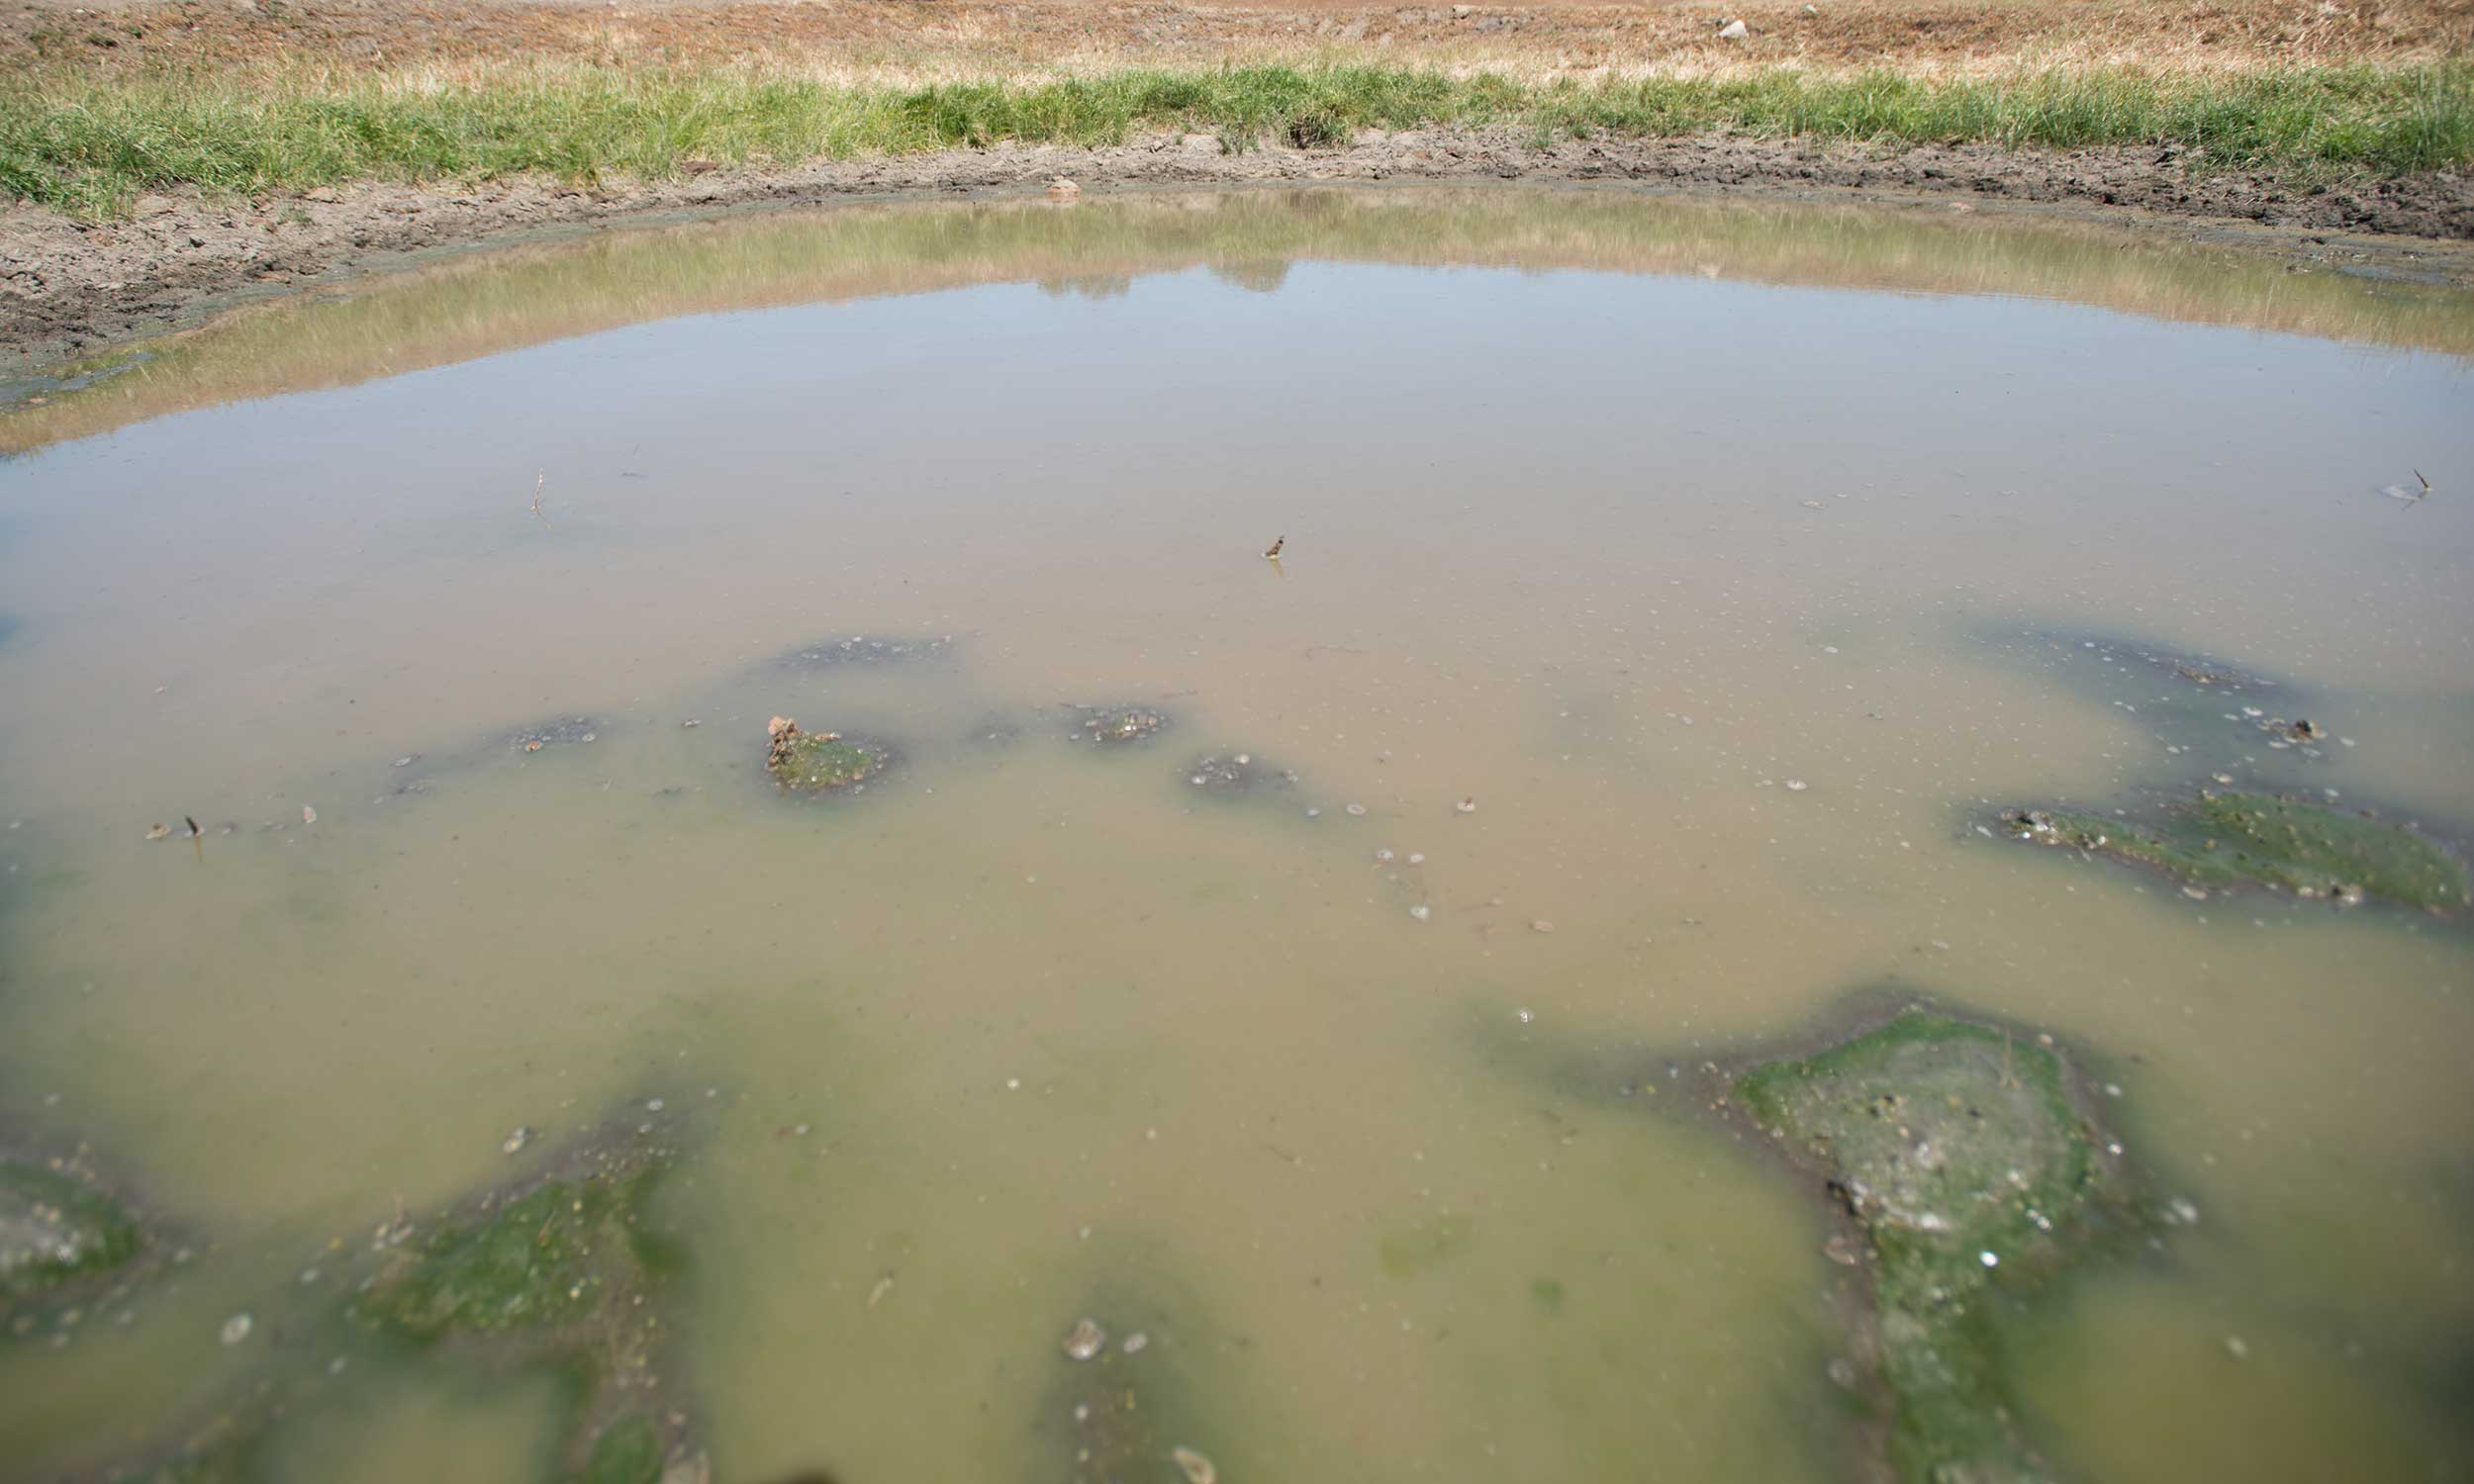 A stock pond with algae blooms developing throughout.